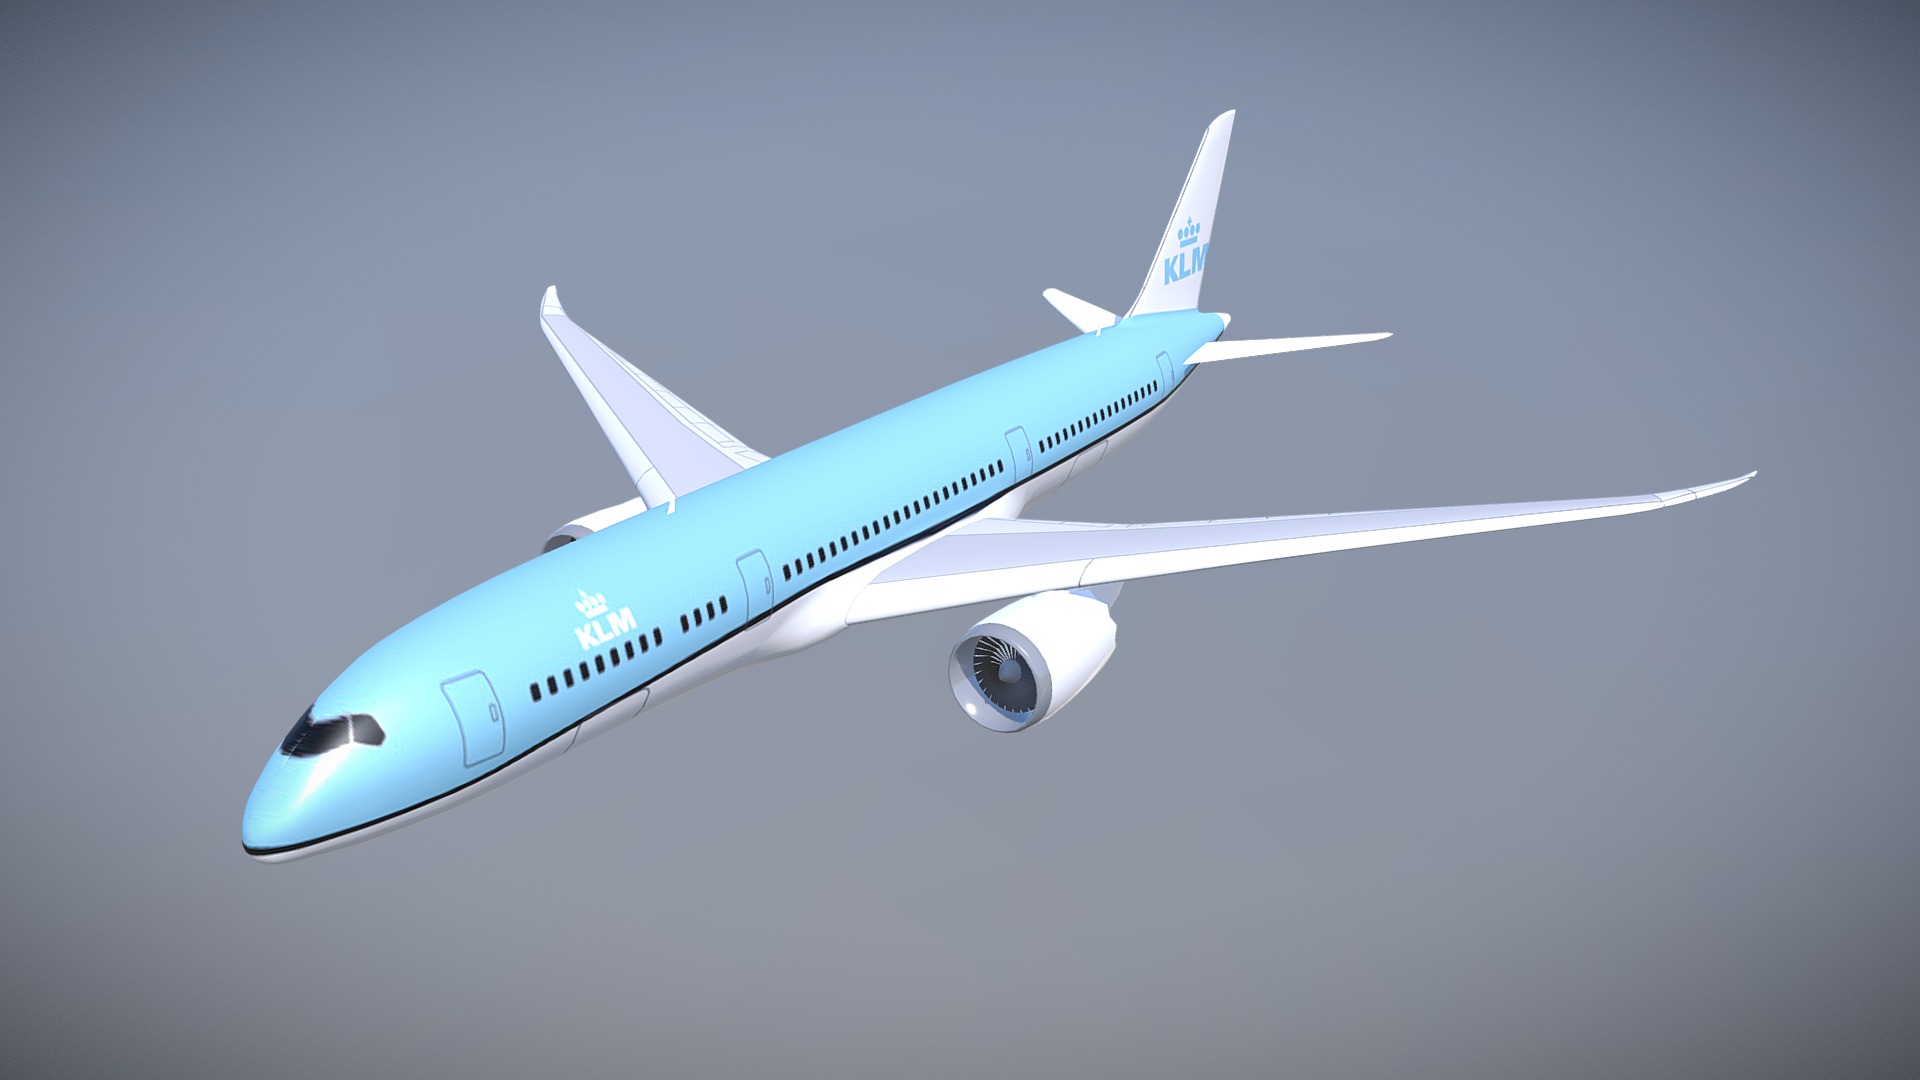 3D model Boeing 787-9 lowpoly airliner - This is a 3D model of the Boeing 787-9 lowpoly airliner. The 3D model is about a large airplane flying in the sky.